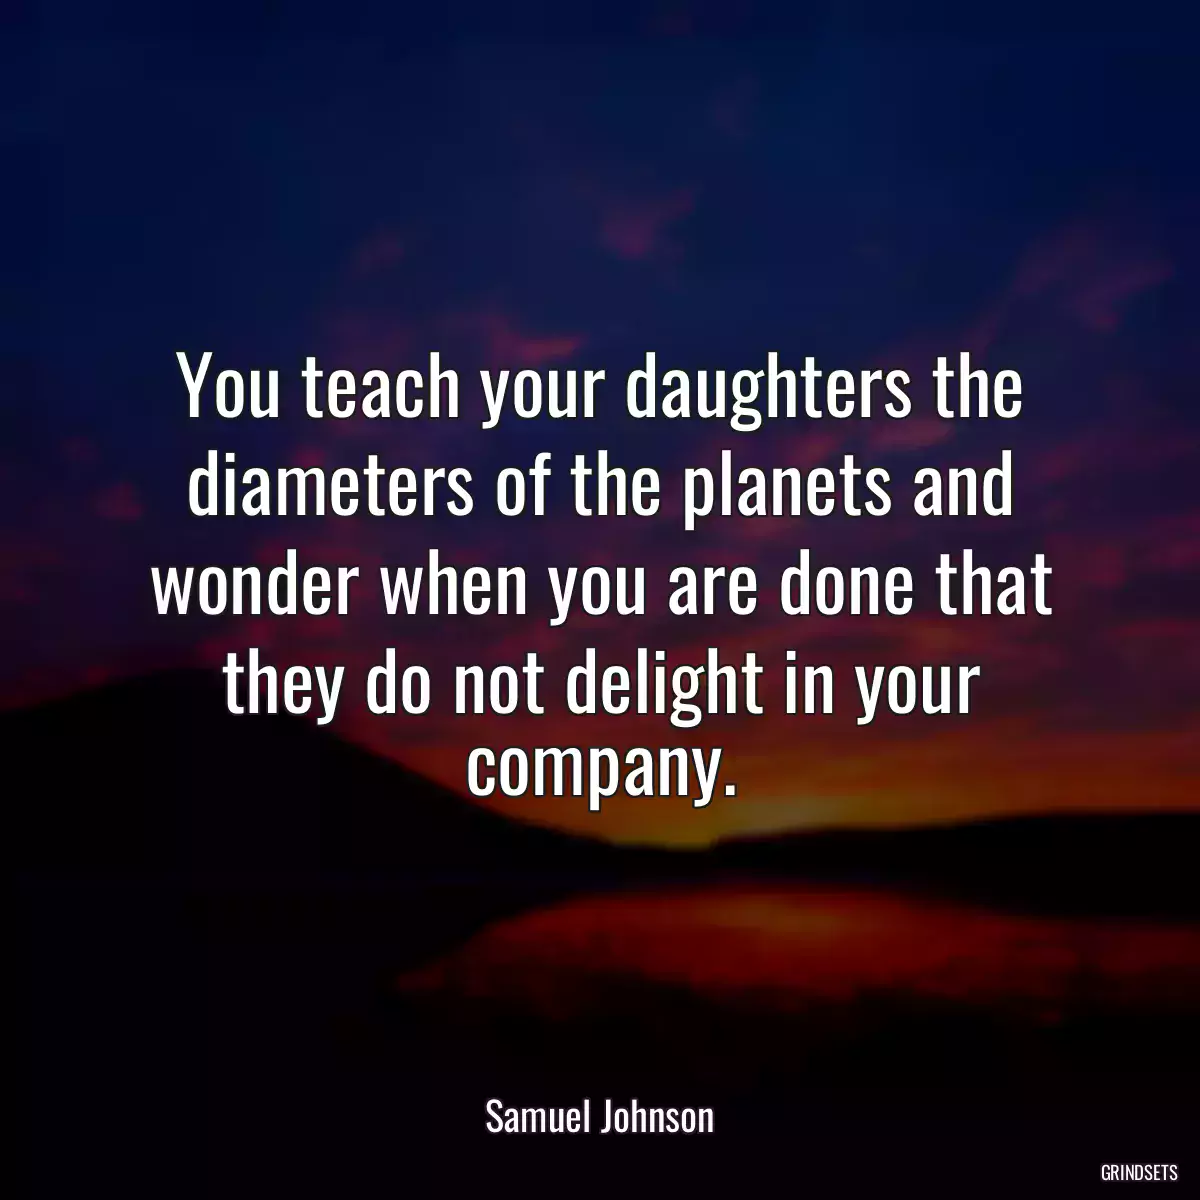 You teach your daughters the diameters of the planets and wonder when you are done that they do not delight in your company.